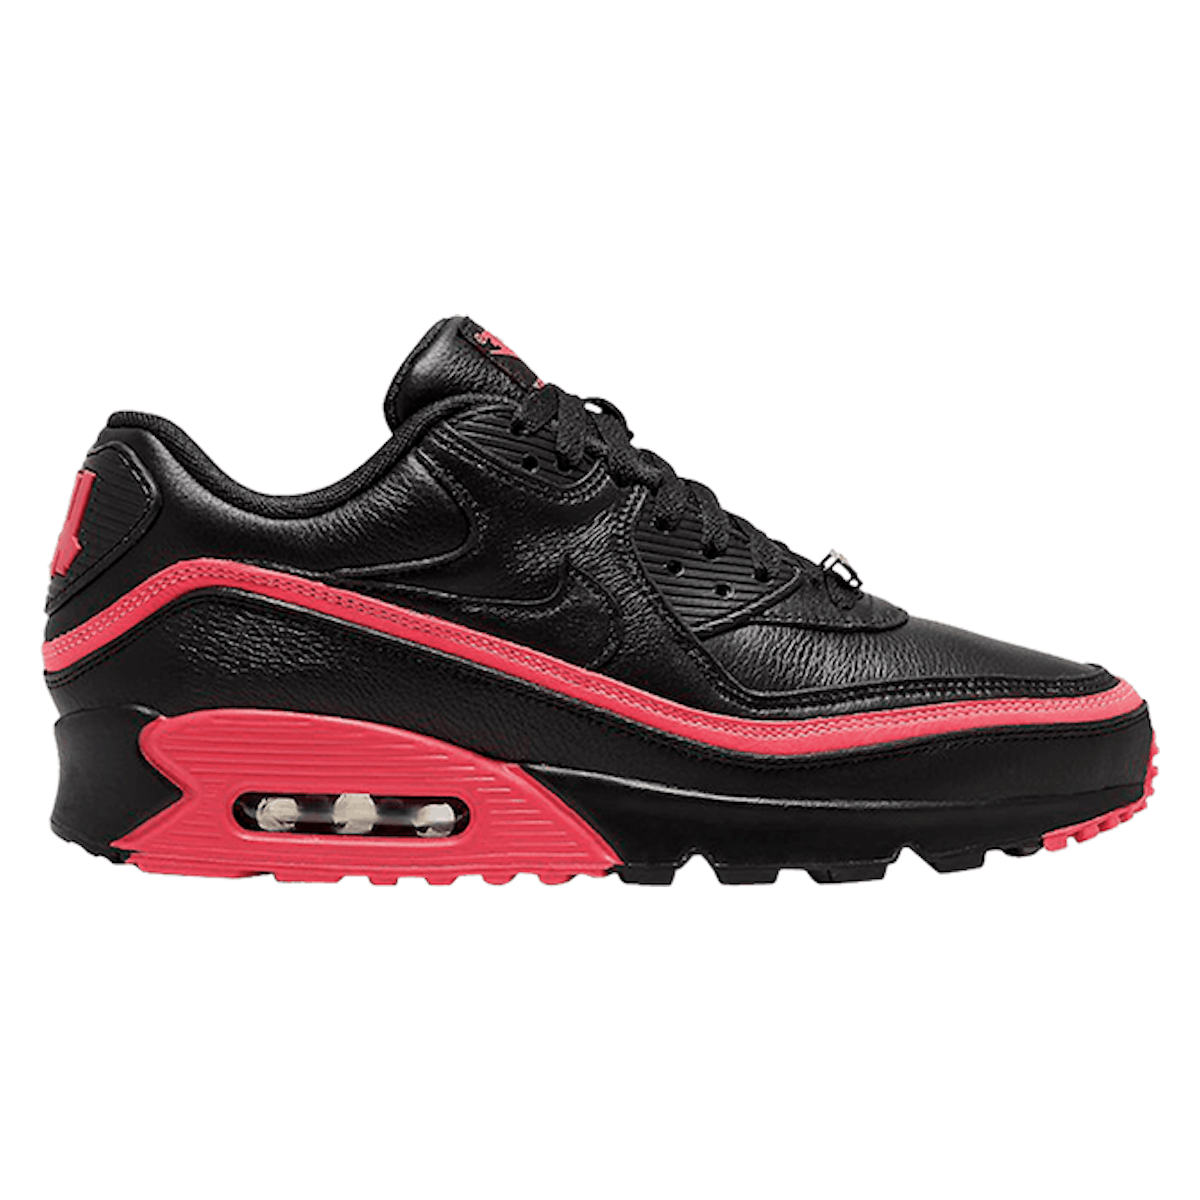 Undefeated x Nike Air Max 90 "Black Solar Red"